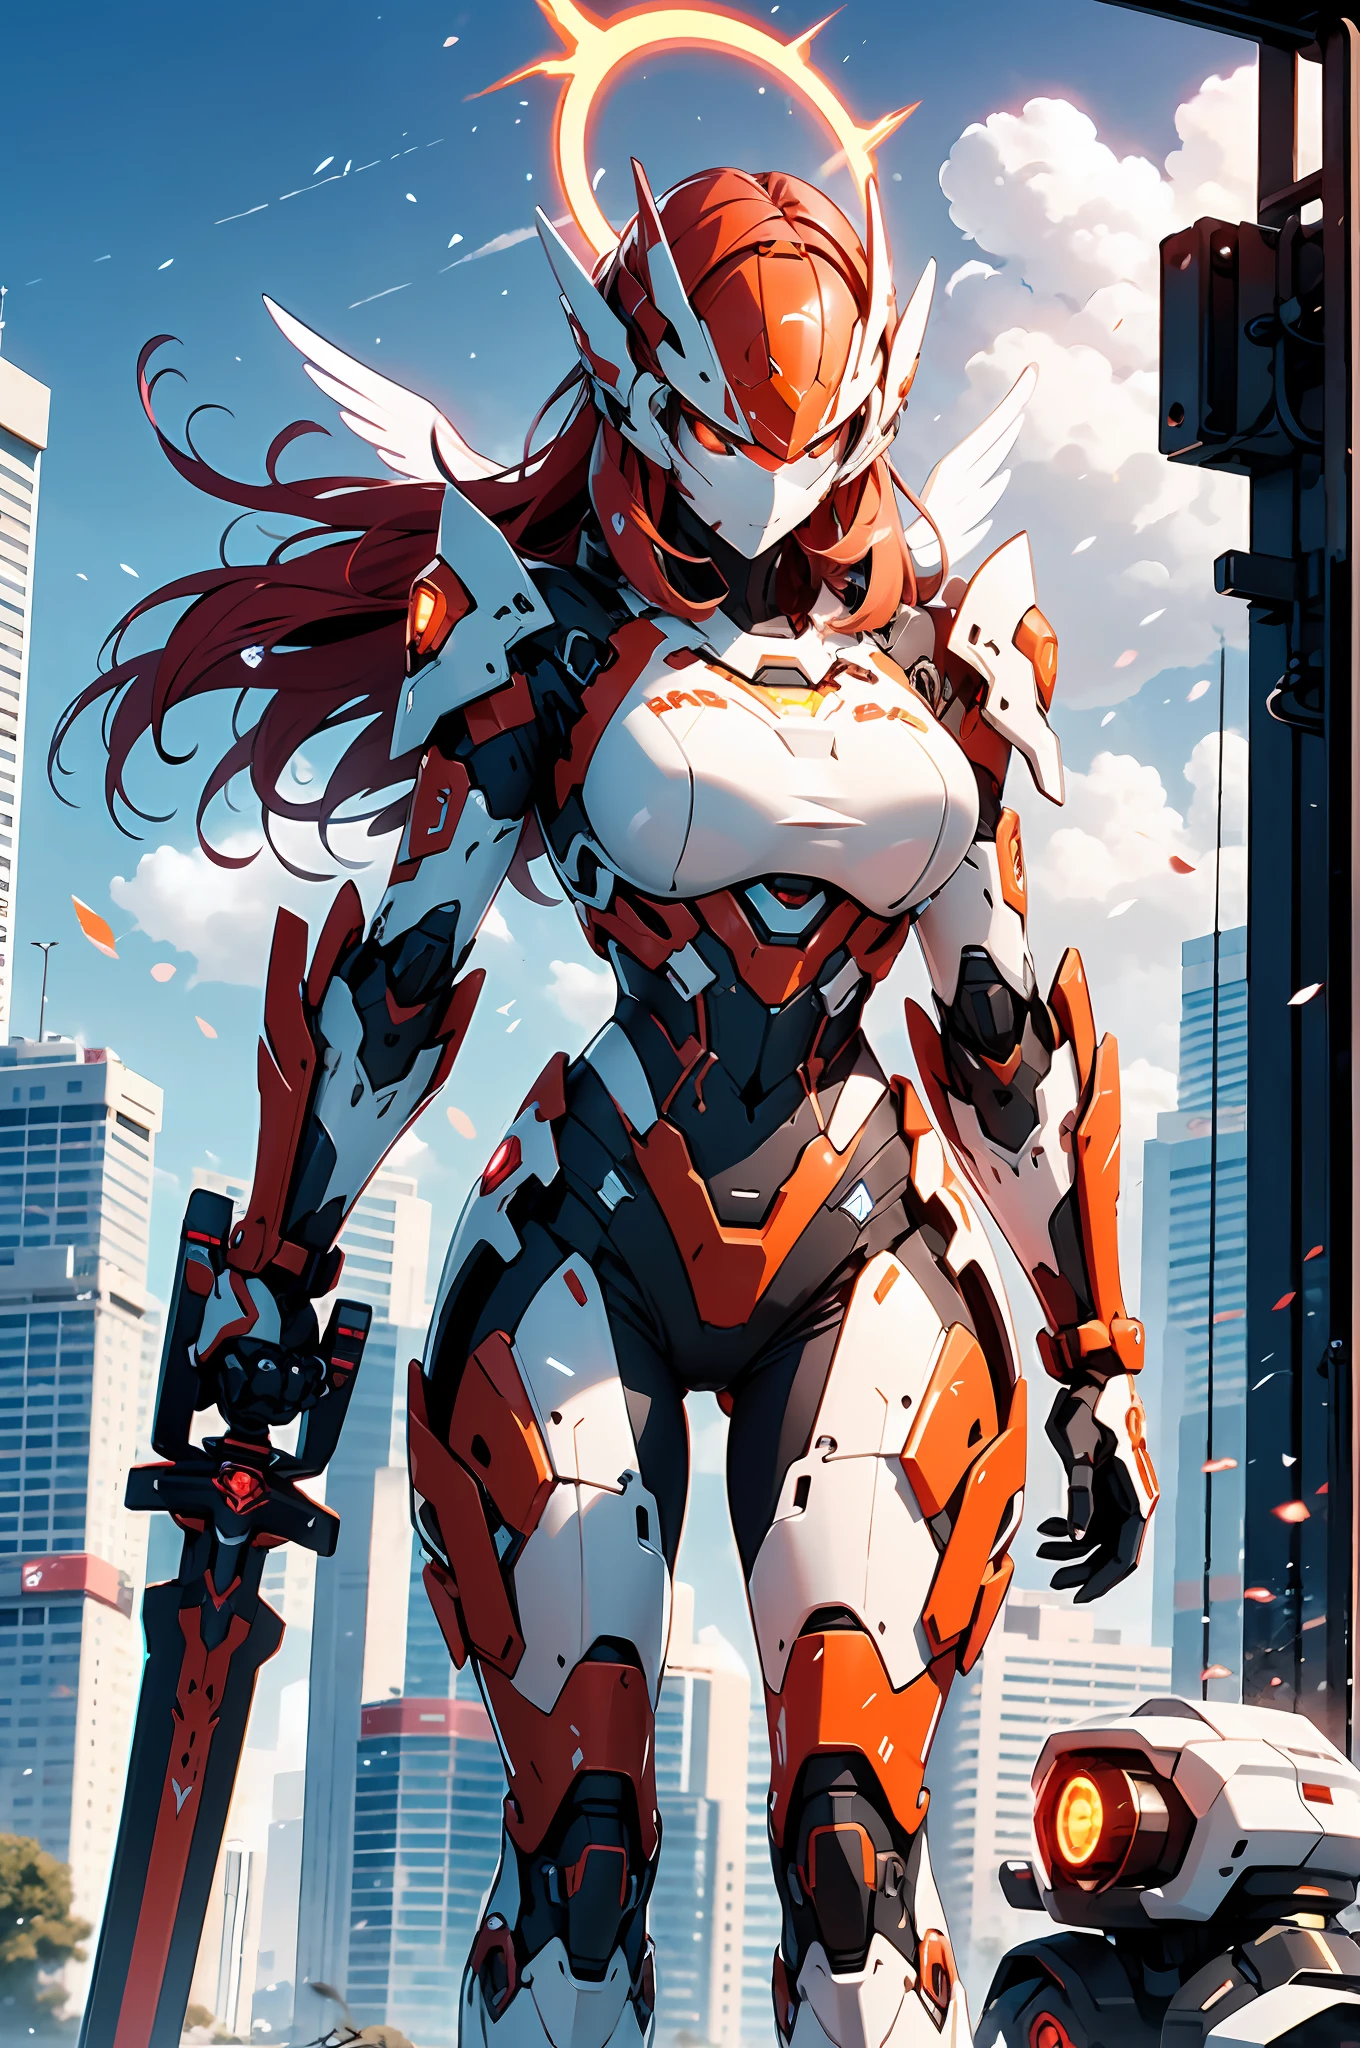 Futuristic style mecha, shining on the surface of the mecha, pink and red appearance, girl, slender waist, big breasts, big ass, flowing long fiery red hair, transparent face armor, nine-headed body, forward stance, wielding a long sword, holding a weapon in his hand, a long sword, a tail wing on his back, spraying flames, an angel halo on his head, surrounded by ruins, HD, CG image, ultra-wide-angle lens, gigantic